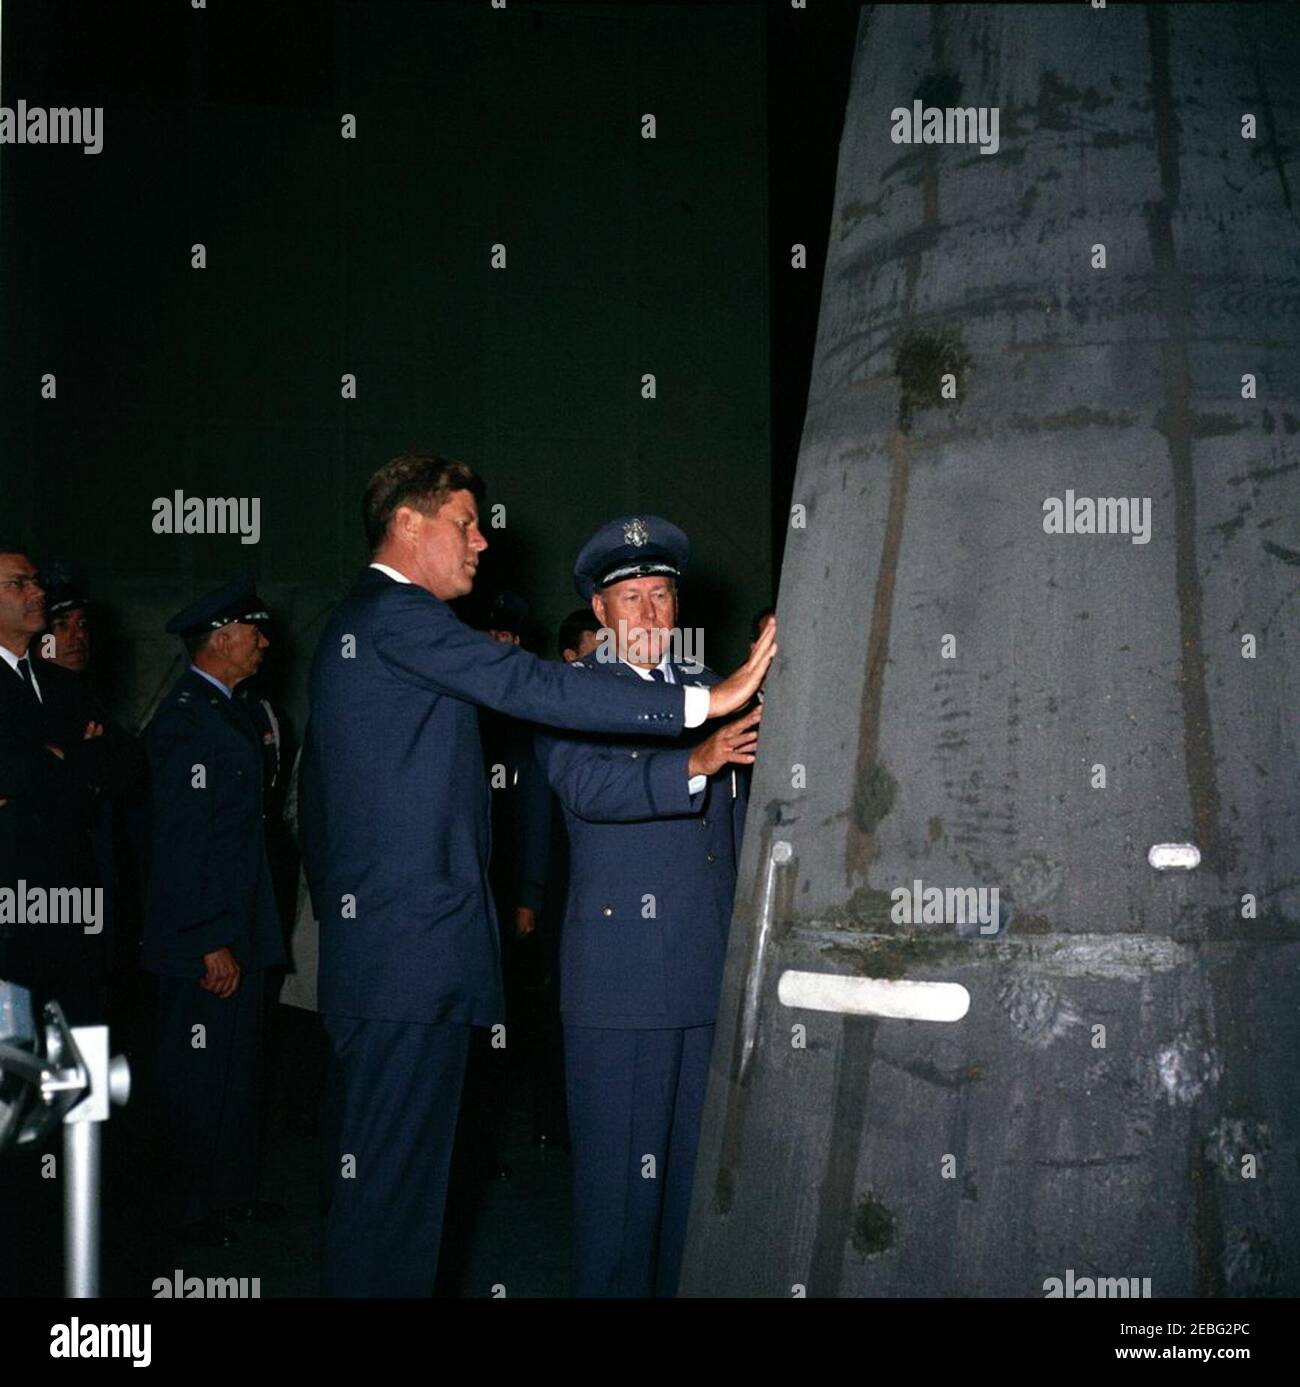 Trip to California: Vandenberg Air Force Base, 4:08PM. During a tour of space craft displays inside a hangar at Vandenberg Air Force Base in California, President John F. Kennedy views a recovered nose cone fired by an Atlas missile. Left to right: Secretary of Defense, Robert S. McNamara; Air Force Aide to the President, Brigadier General Godfrey T. McHugh; Major General Joseph J. Preston; President Kennedy; Commander of Strategic Air Command, General Thomas S. Power. Stock Photo